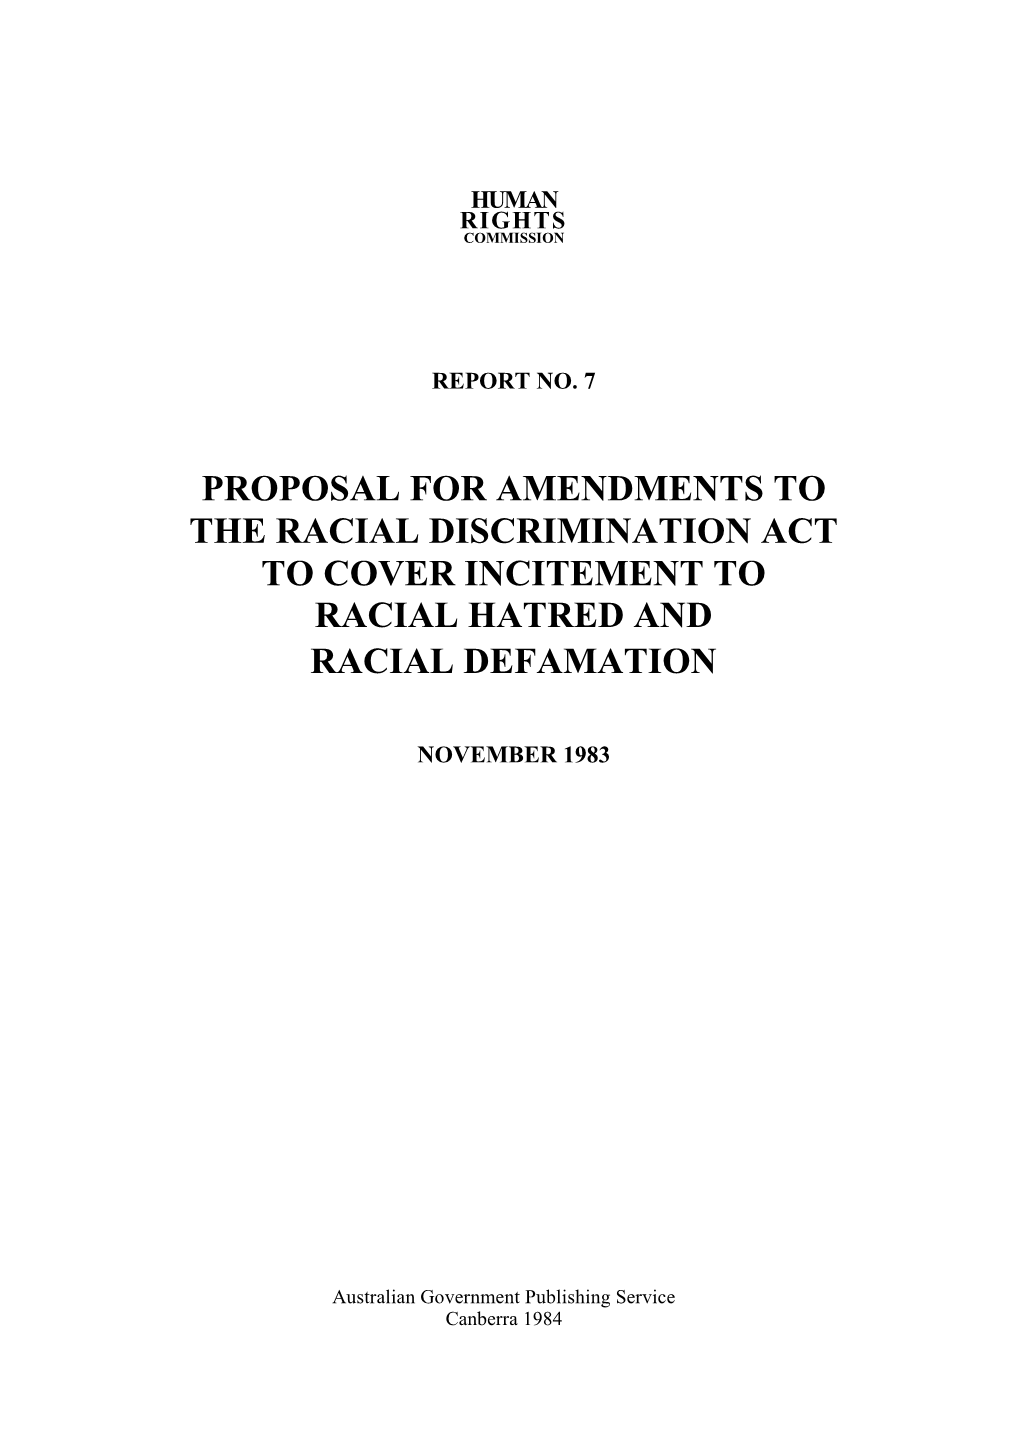 Proposal for Amendments to the Racial Discrimination Act to Cover Incitement to Racial Hatred and Racial Defamation